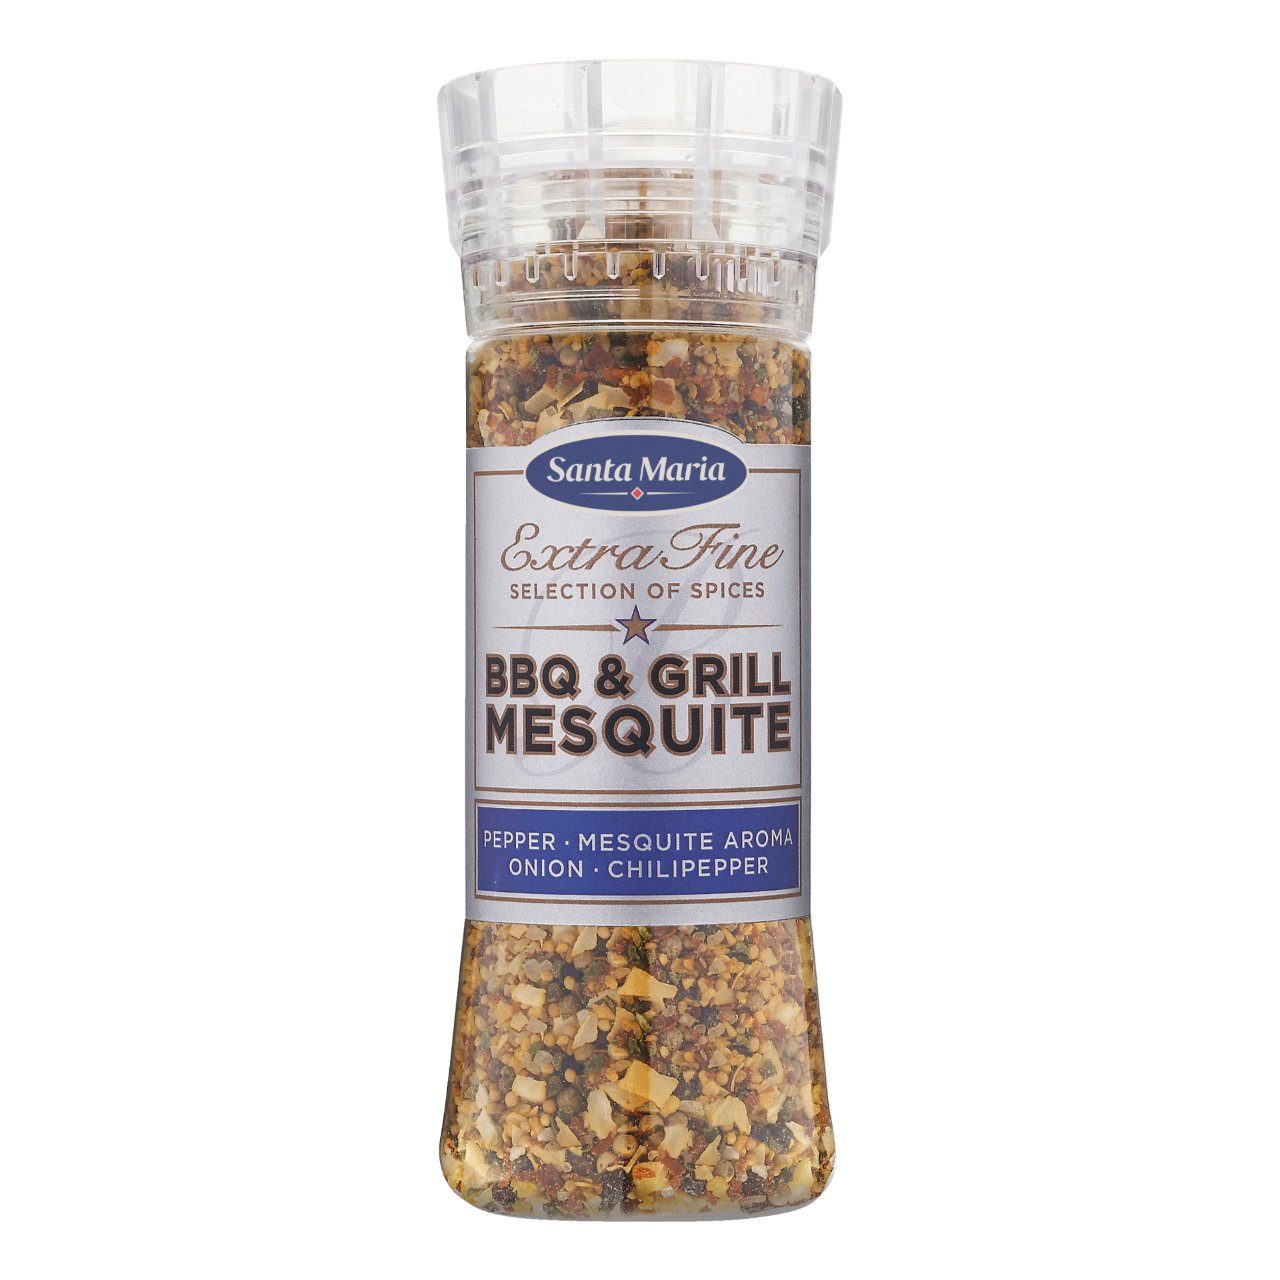 Bbq  grill mesquite